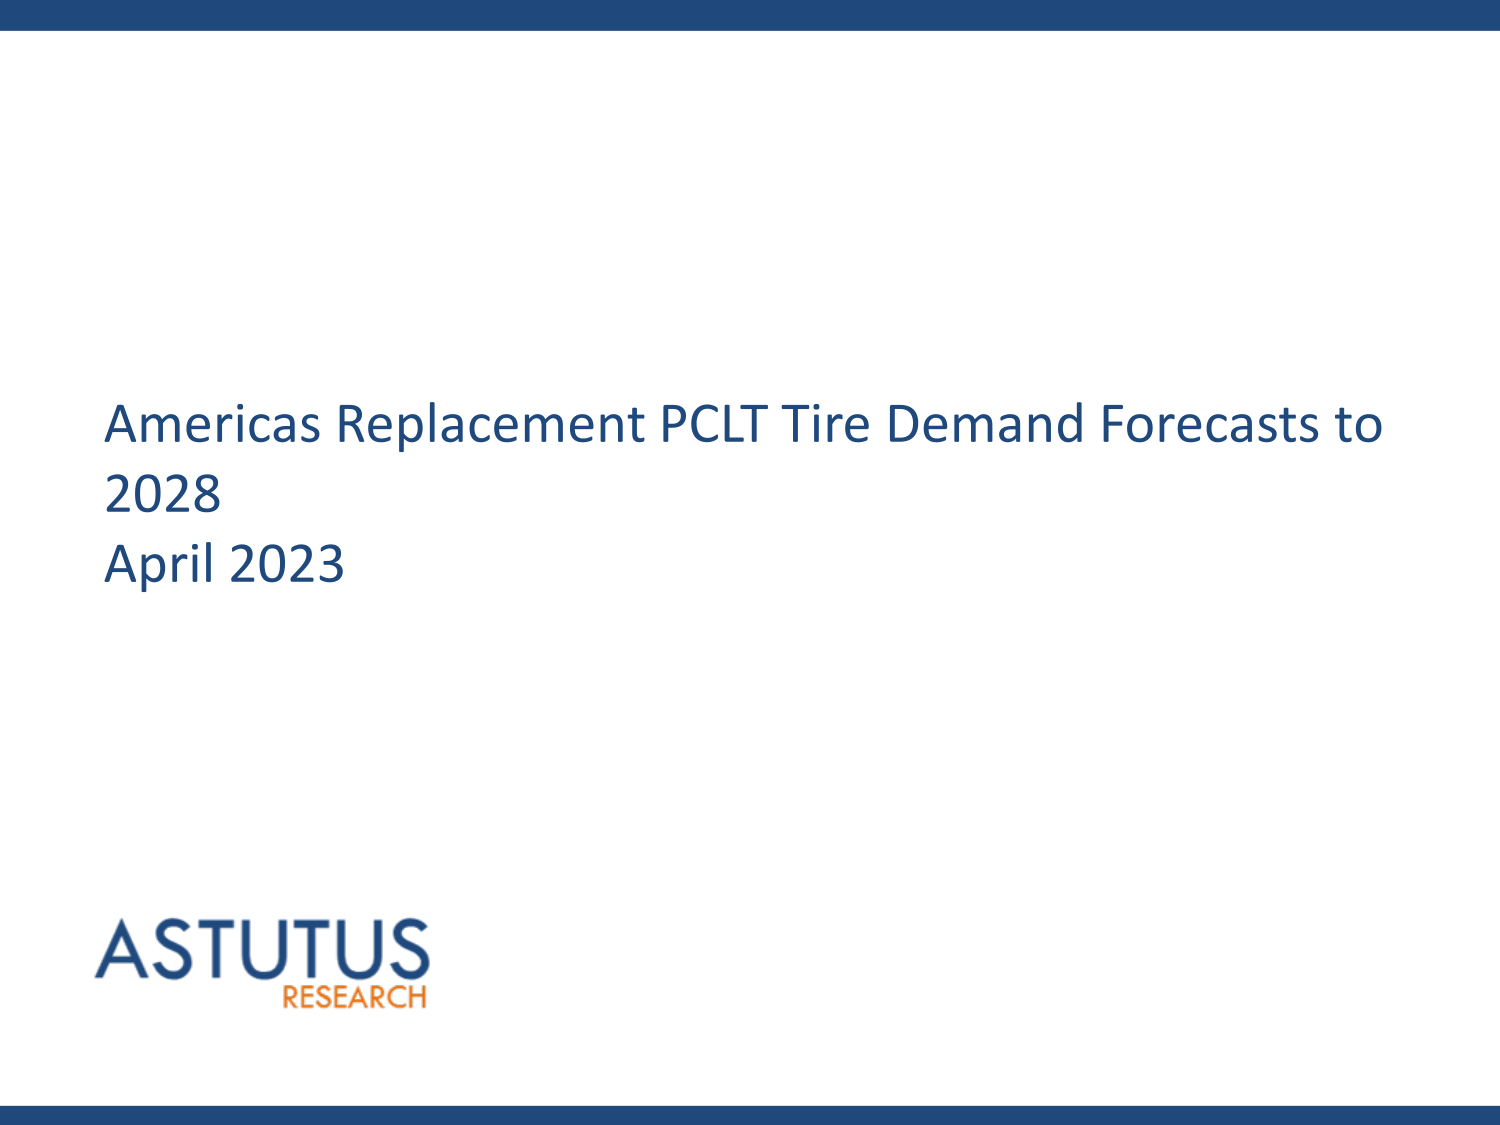 Americas Replacement PCLT Tire Market Forecasts to 2028